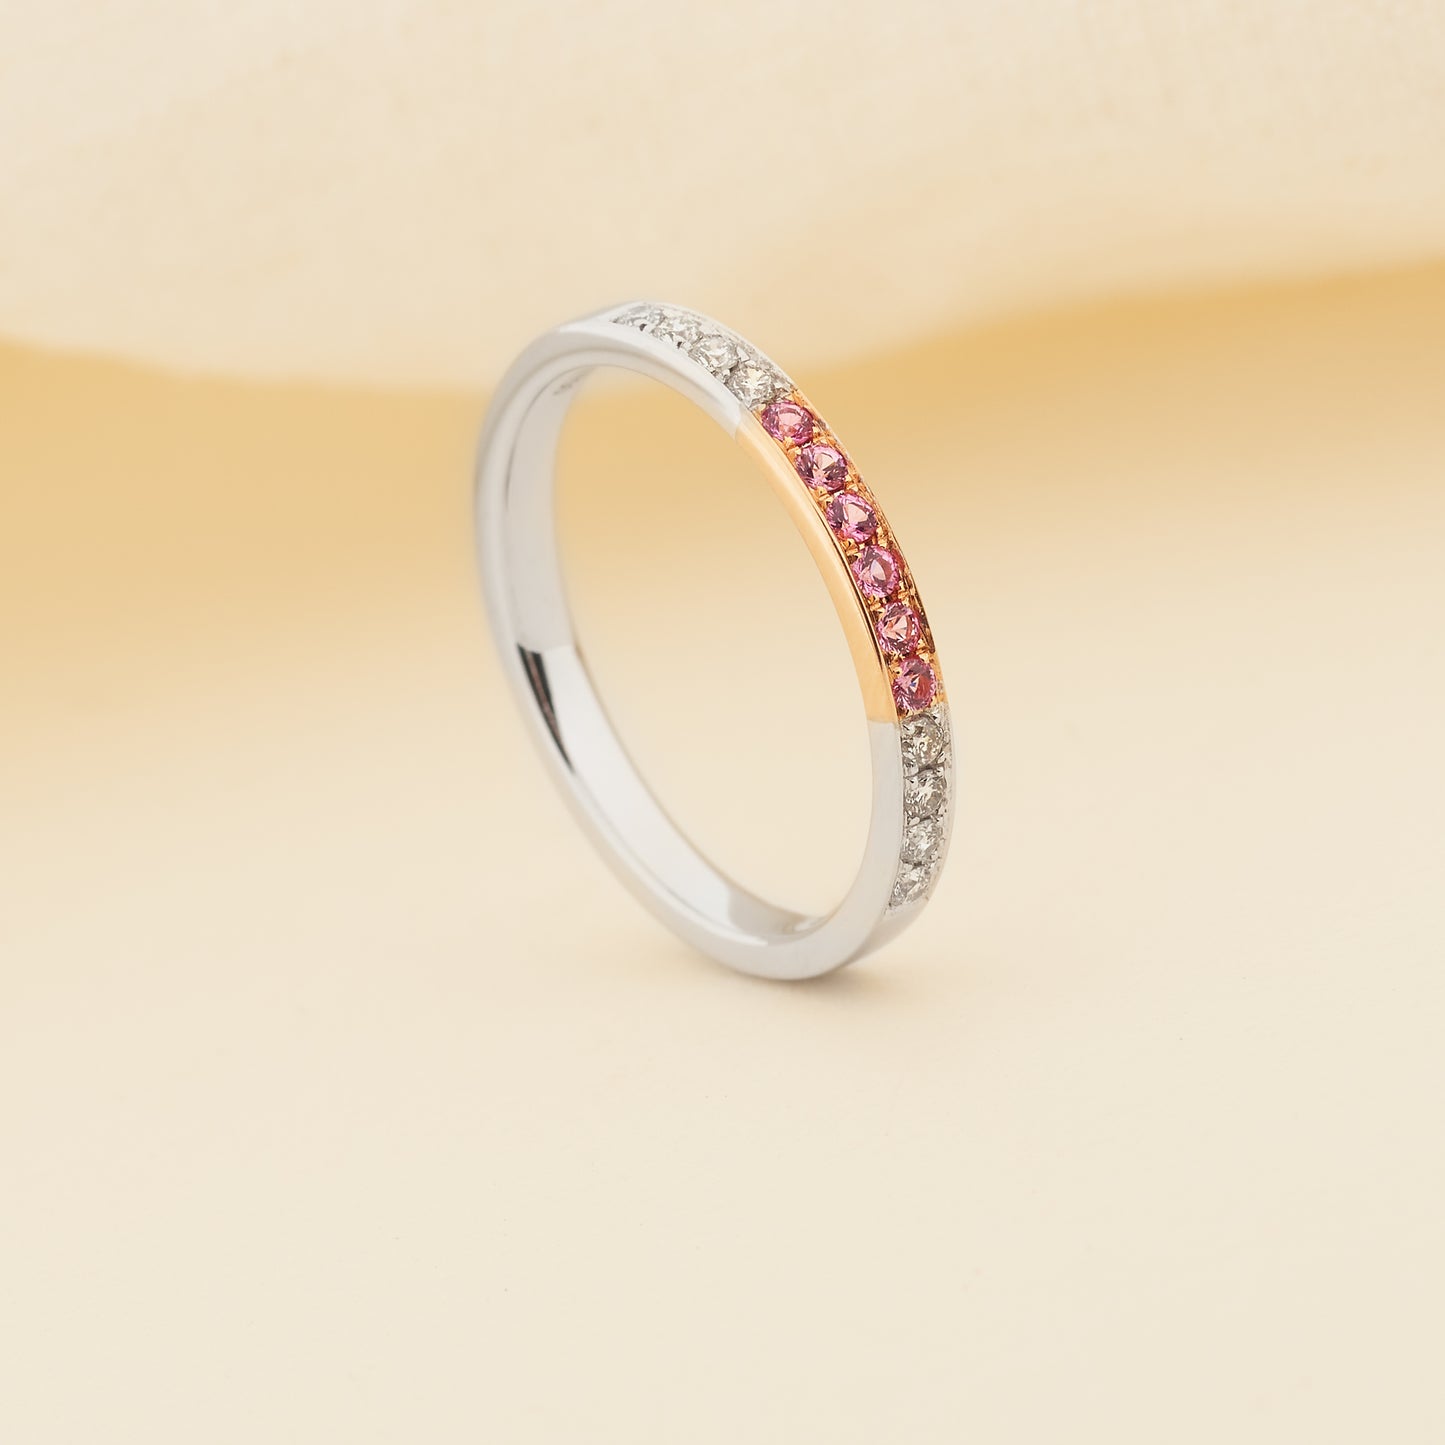 18K White and Rose Gold Diamond and Pink Sapphire Wedder or Eternity Ring